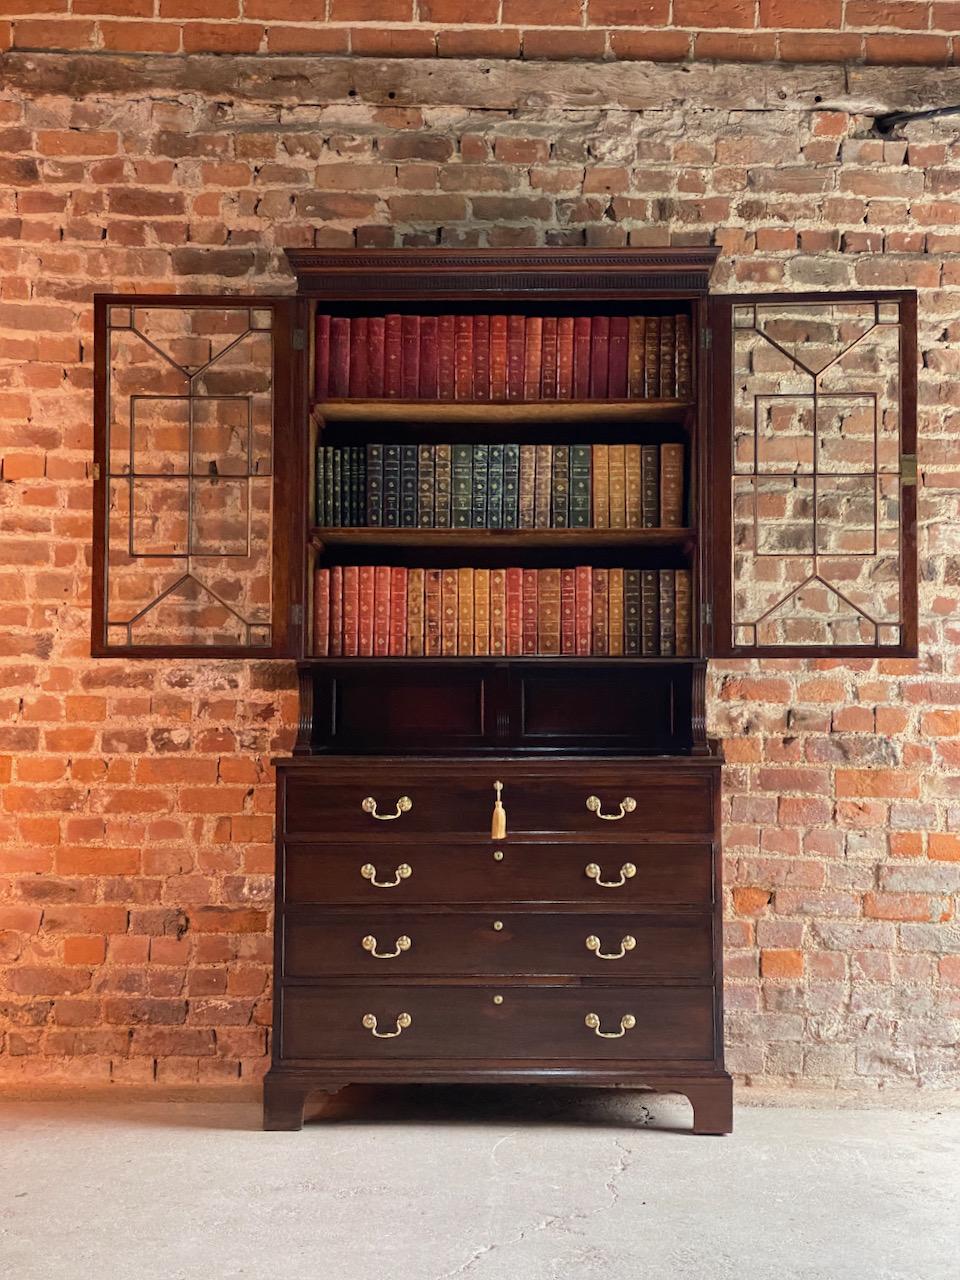 Antique Mahogany Astragal Glazed Bookcase Secretaire Victorian, circa 1875 In Good Condition For Sale In Longdon, Tewkesbury